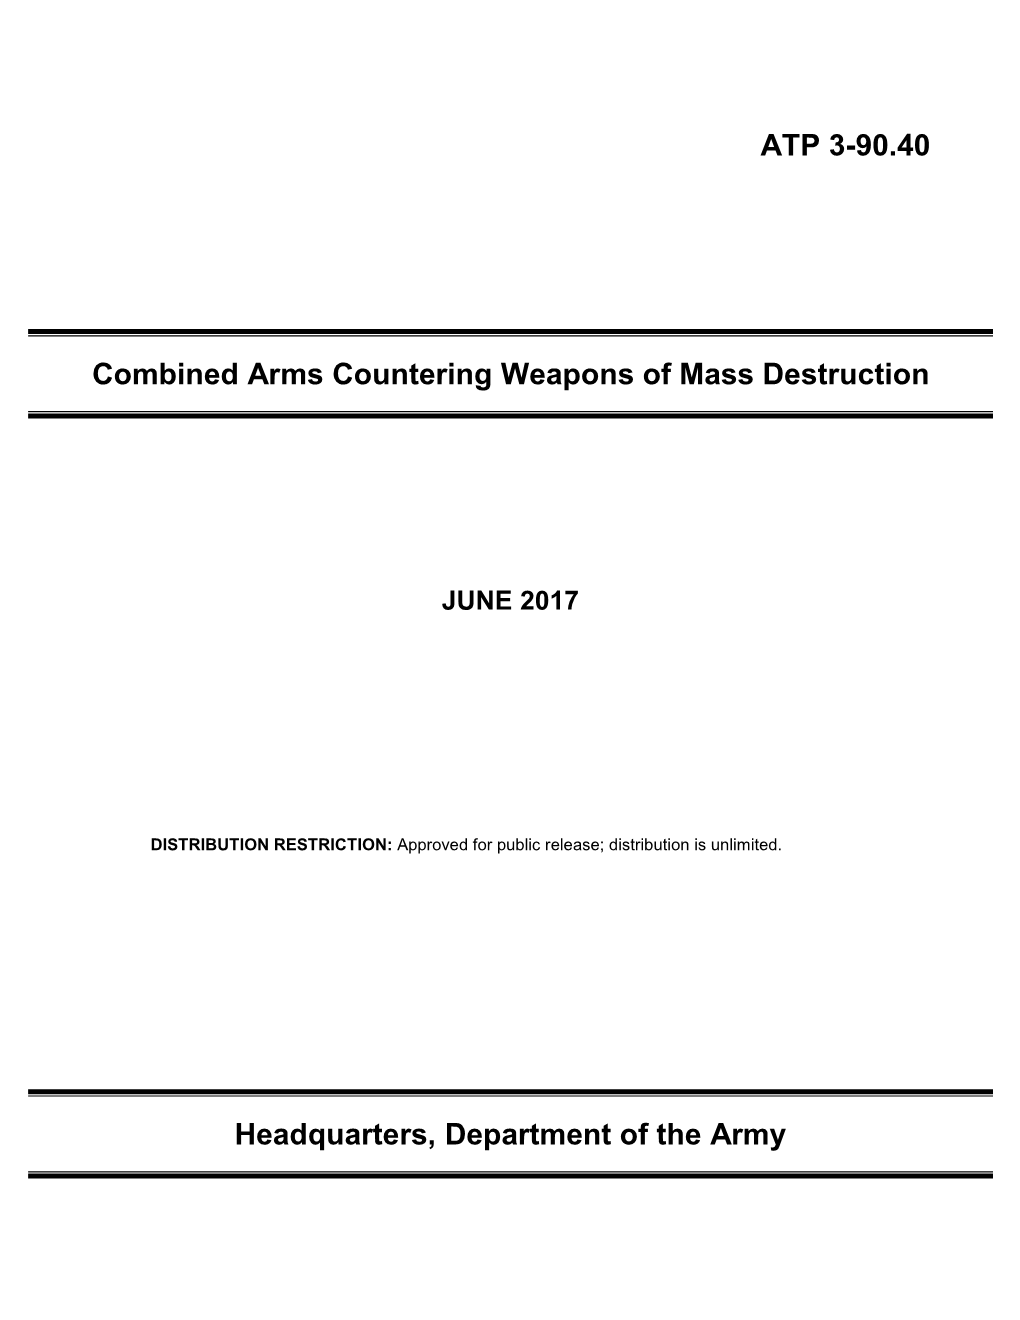 Combined Arms Countering Weapons of Mass Destruction